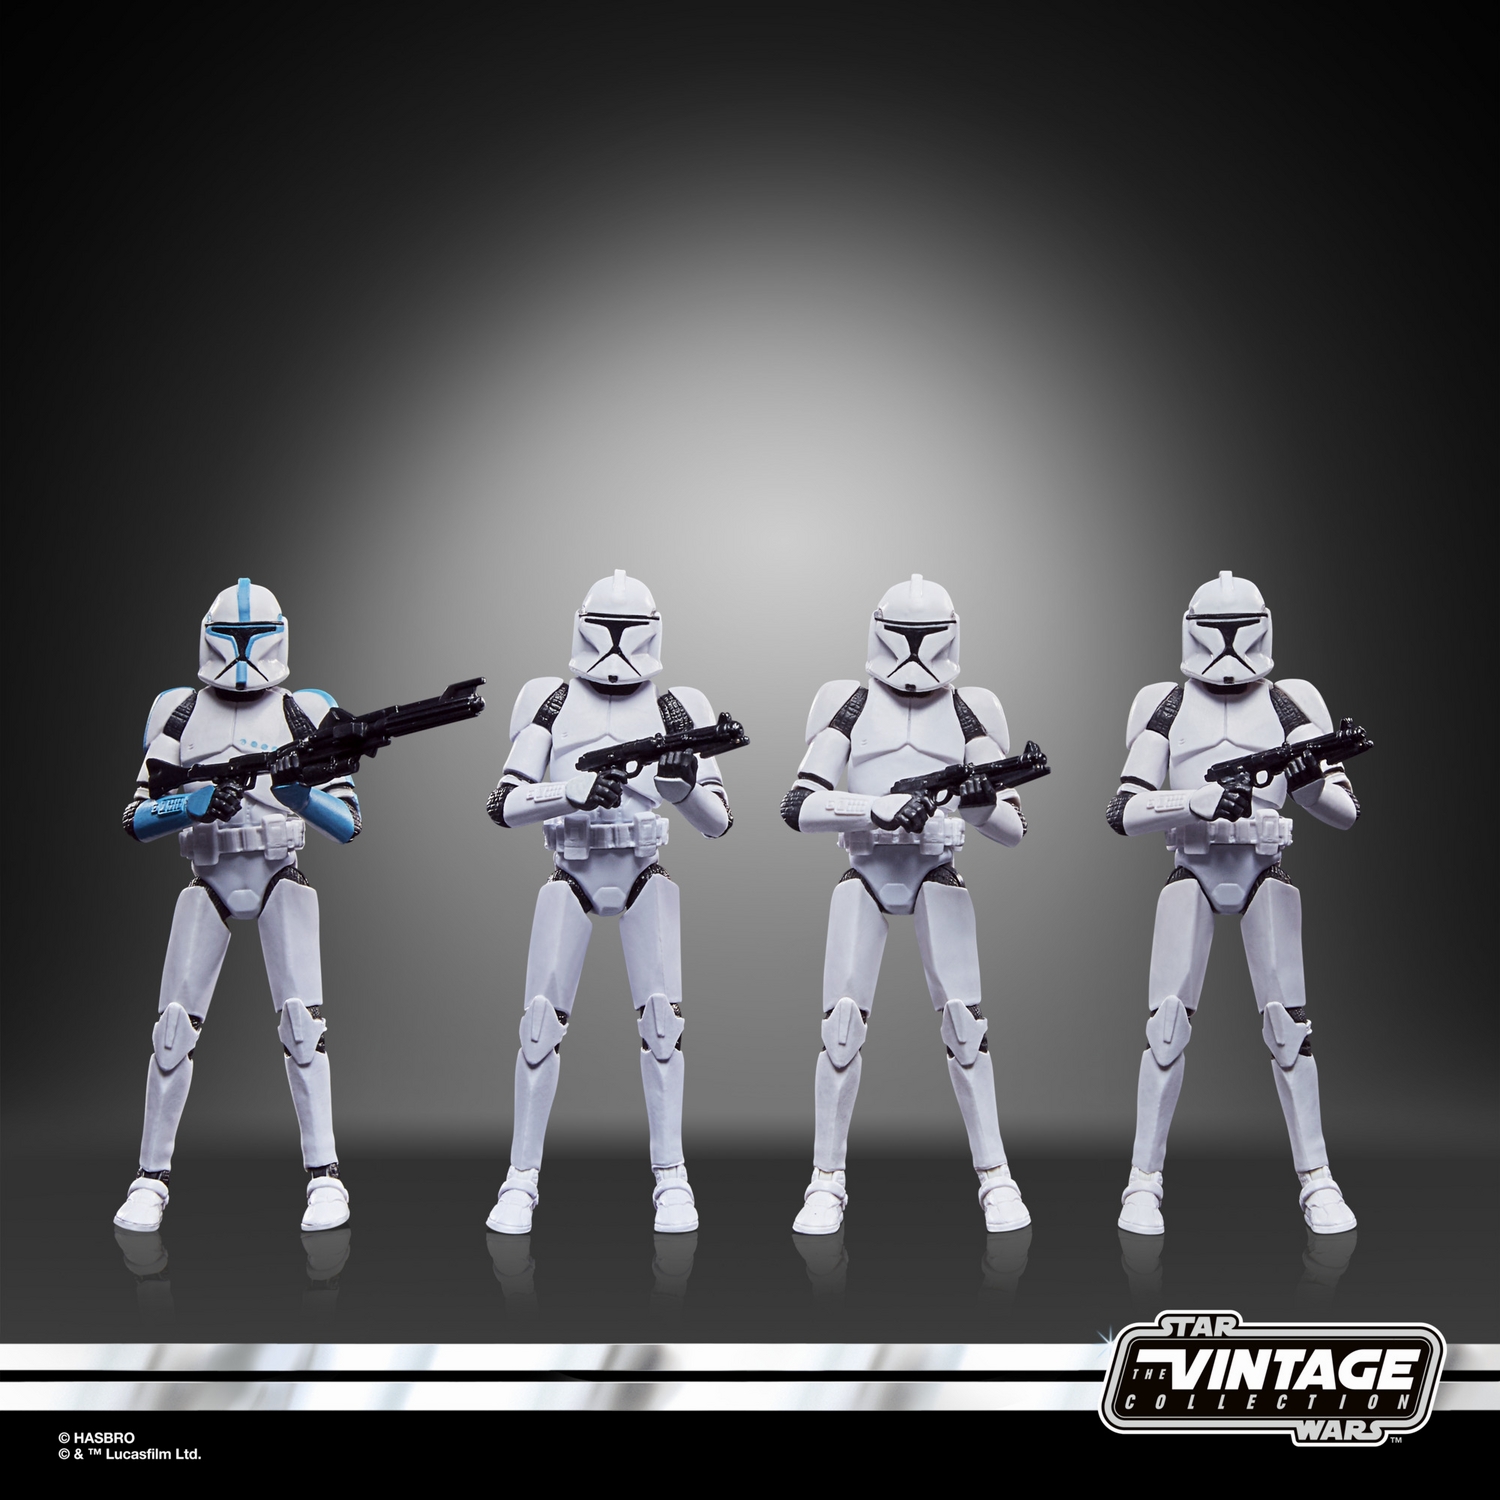 STAR WARS THE VINTAGE COLLECTION 3.75-INCH PHASE I CLONE TROOPER 4-PACK - 7.jpg